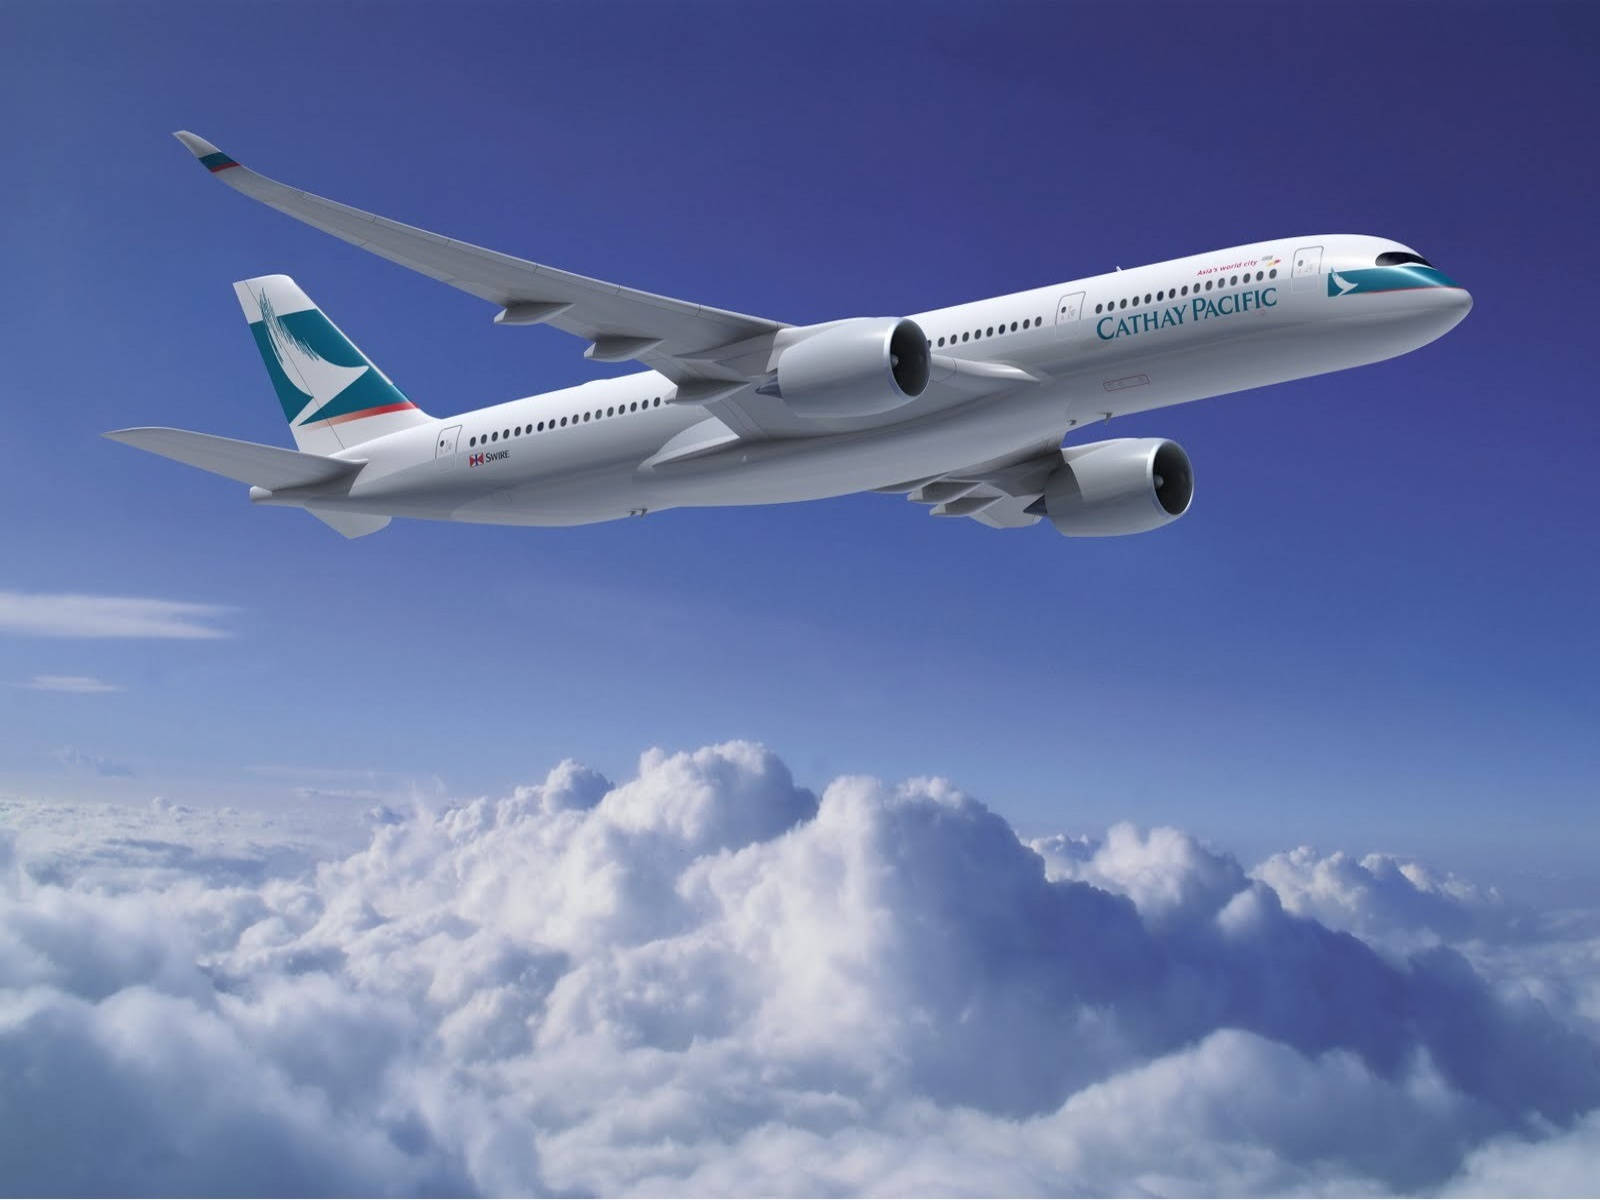 Cathay Pacific Plane Thick Clouds Wallpaper